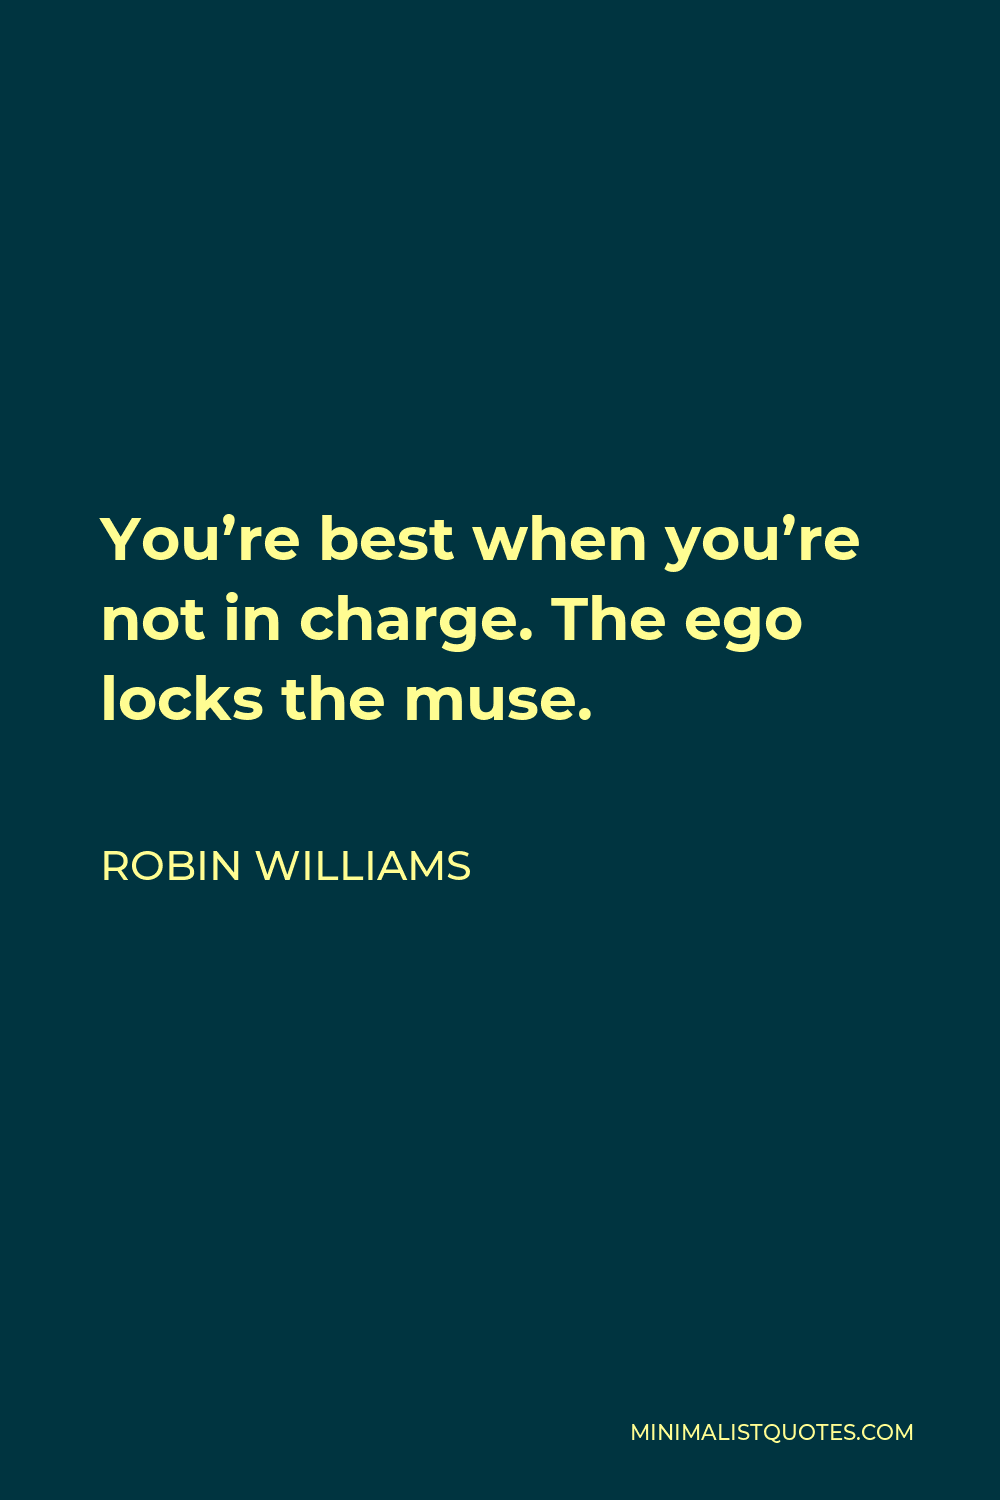 Robin Williams Quote - You’re best when you’re not in charge. The ego locks the muse.